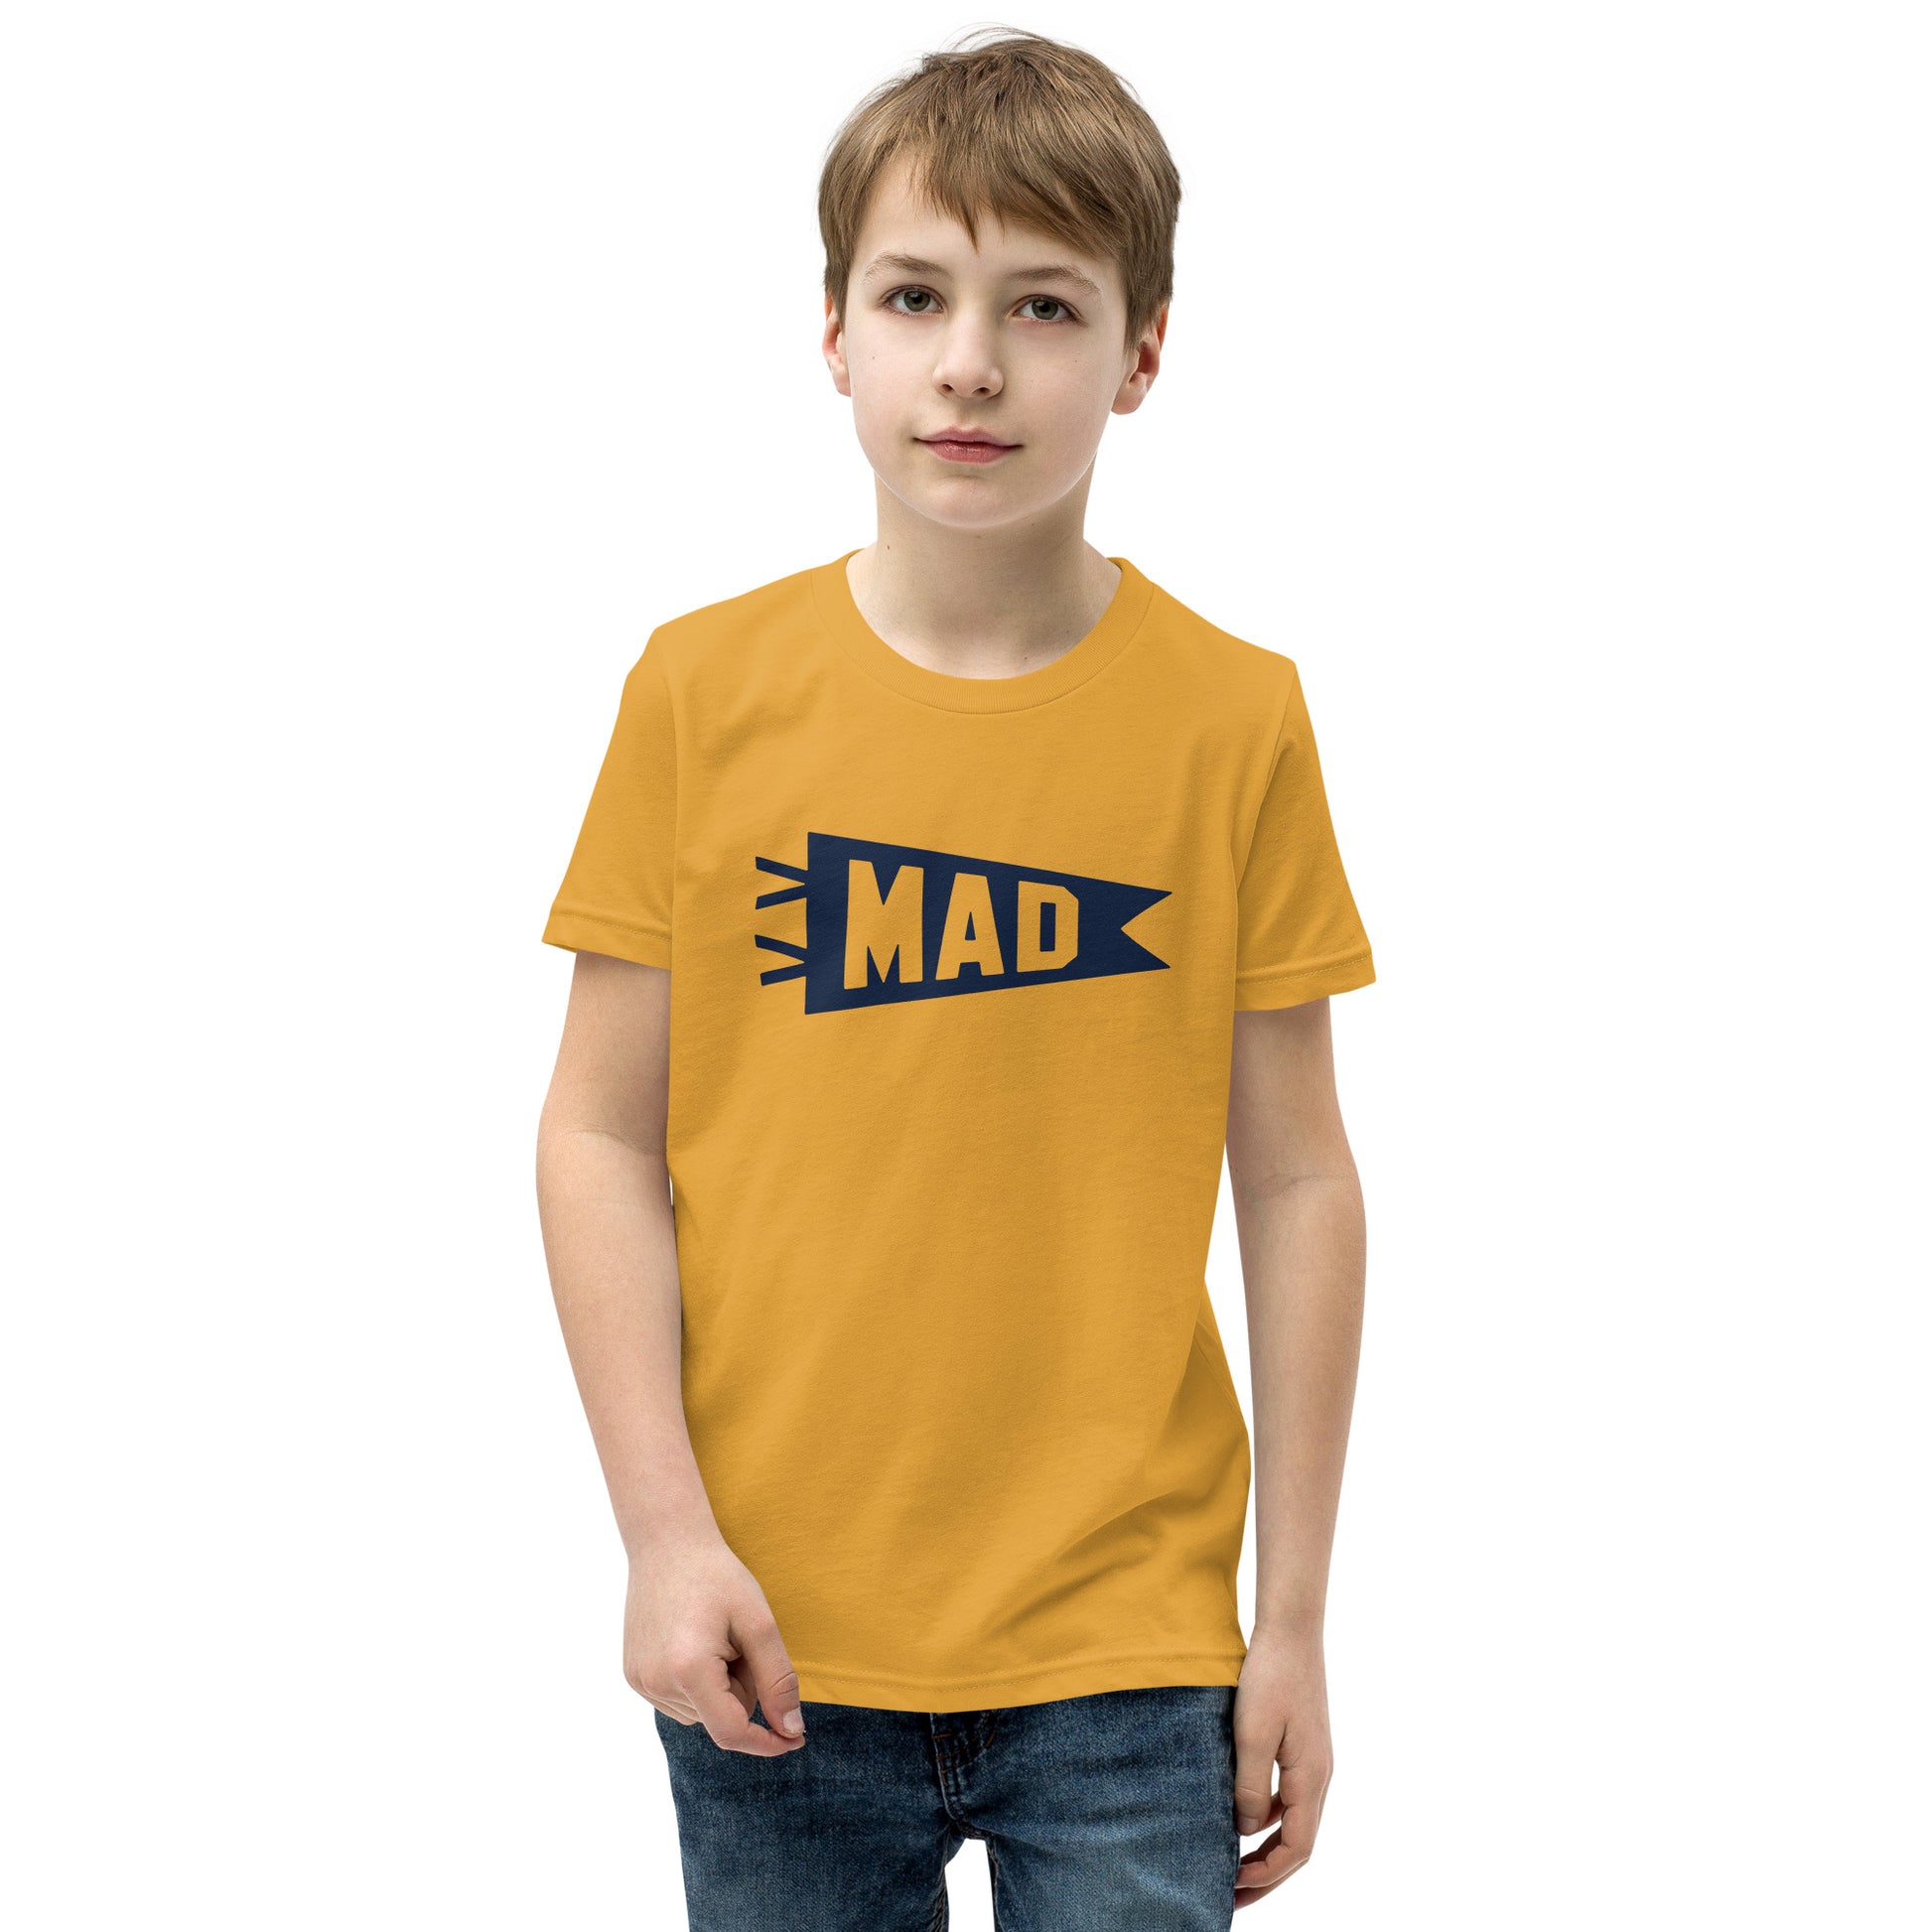 Kid's Airport Code Tee - Navy Blue Graphic • MAD Madrid • YHM Designs - Image 08